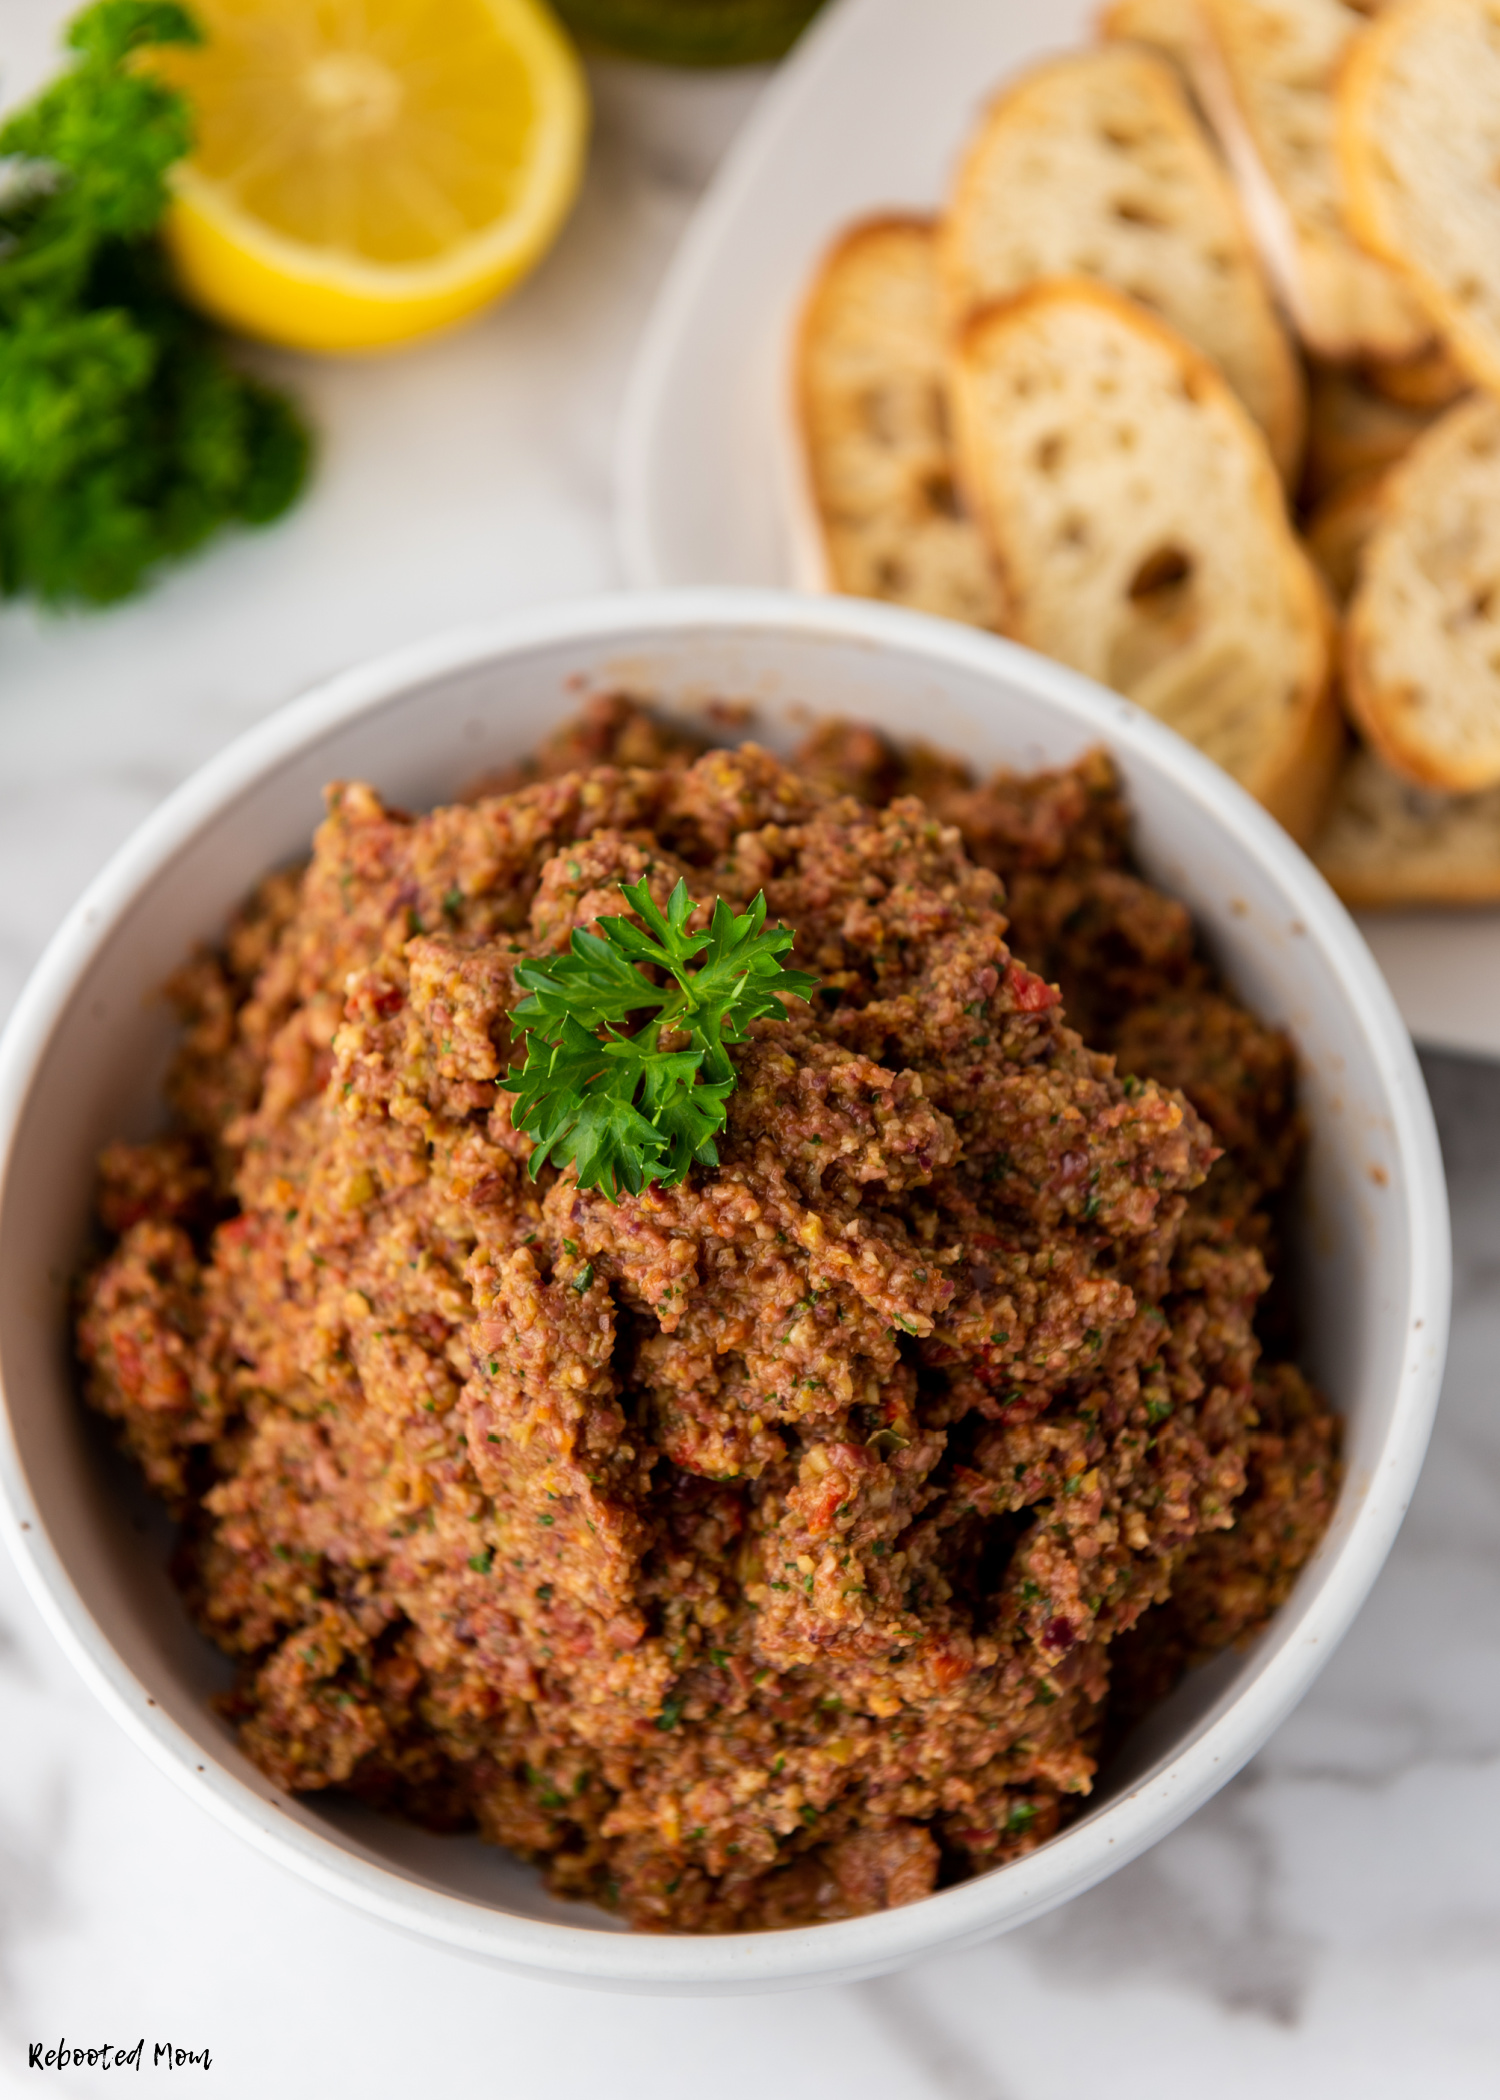 Homemade Olive Tapenade is a wonderful olive spread that is easy to make at home. Learn how to make this bold, zippy, delicious spread easily at home!